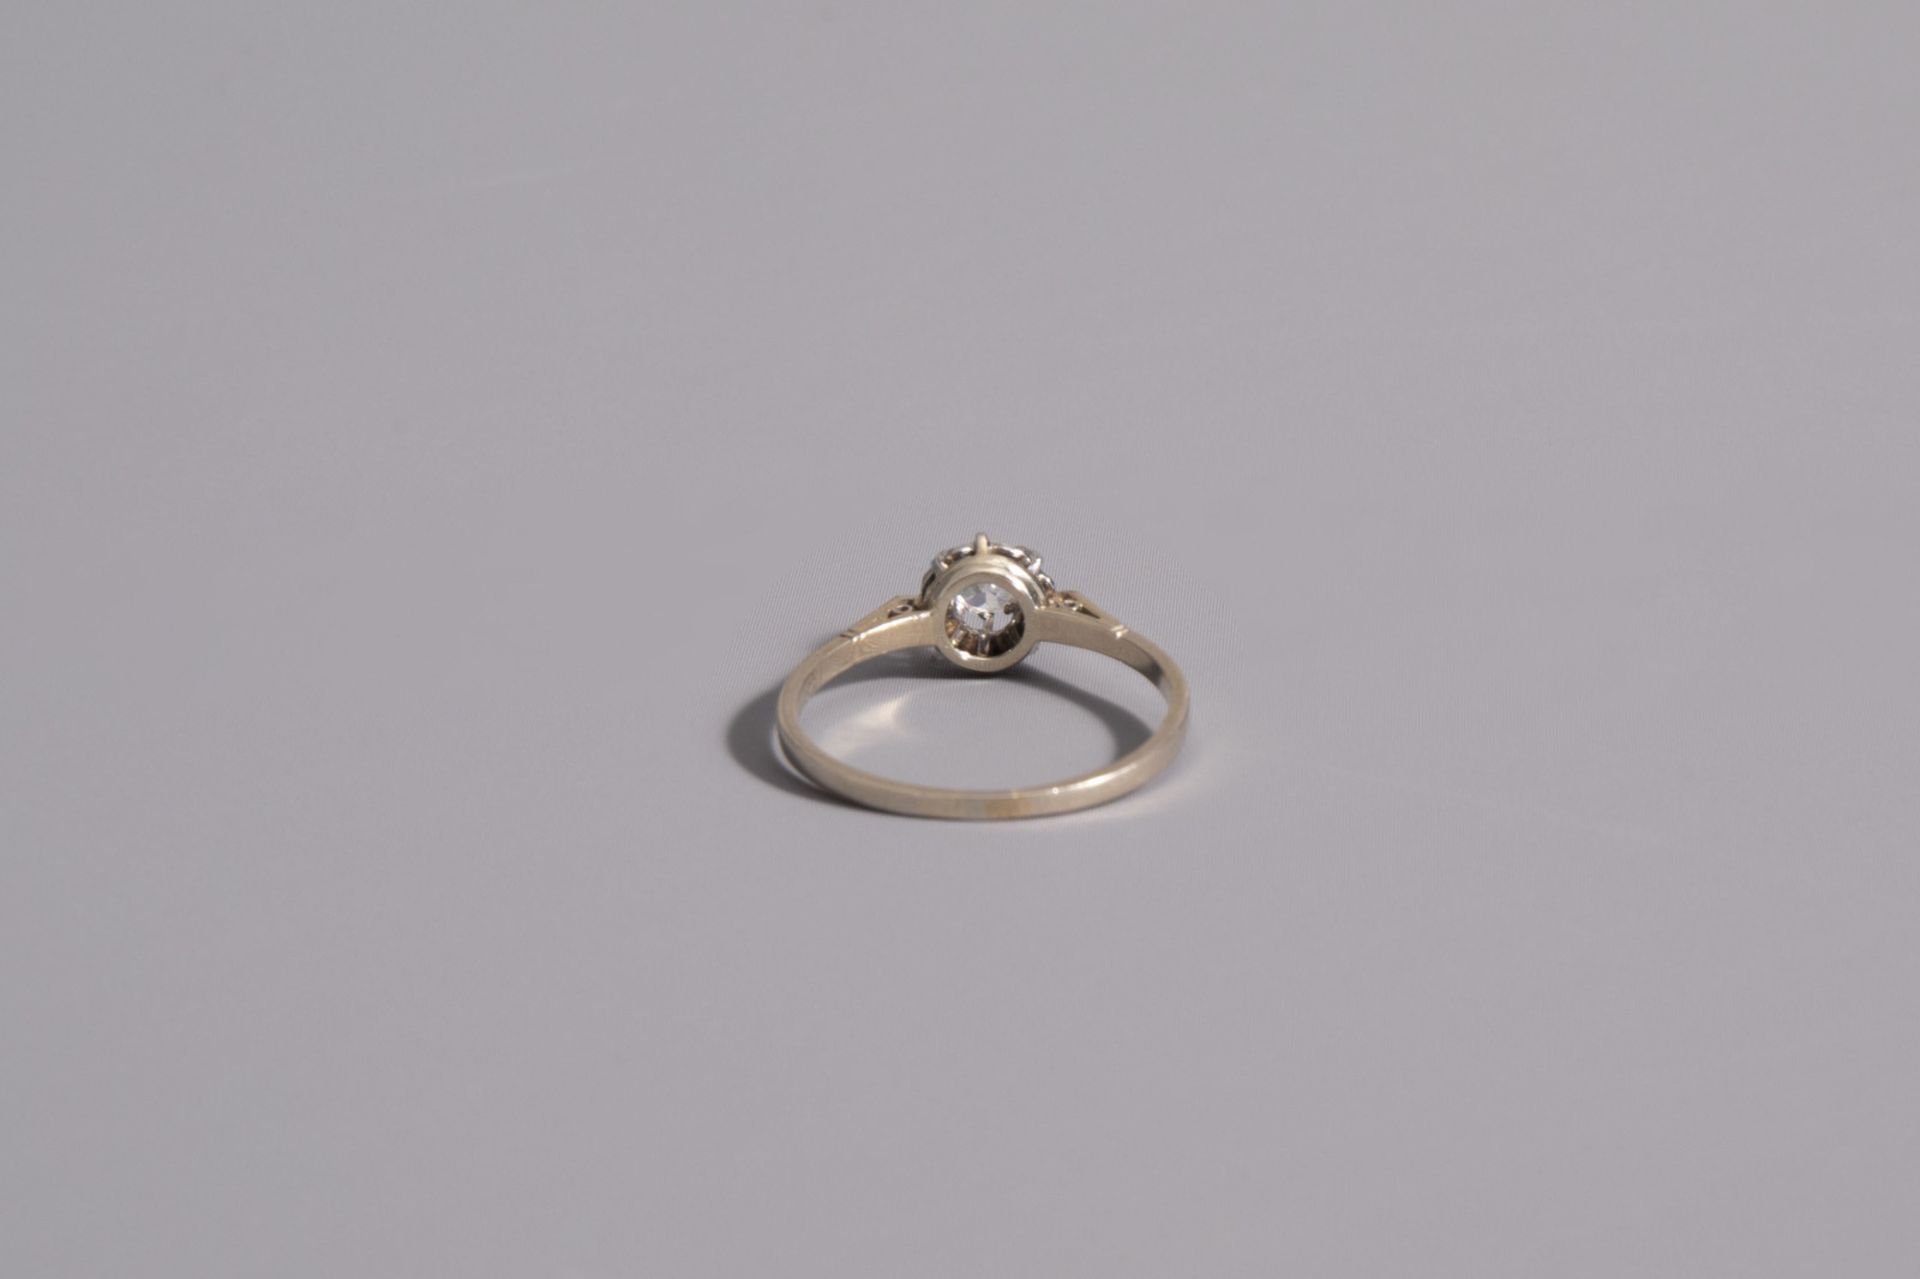 An 18 carat white gold ring set with a diamond, first half of the 20th C. - Image 3 of 3